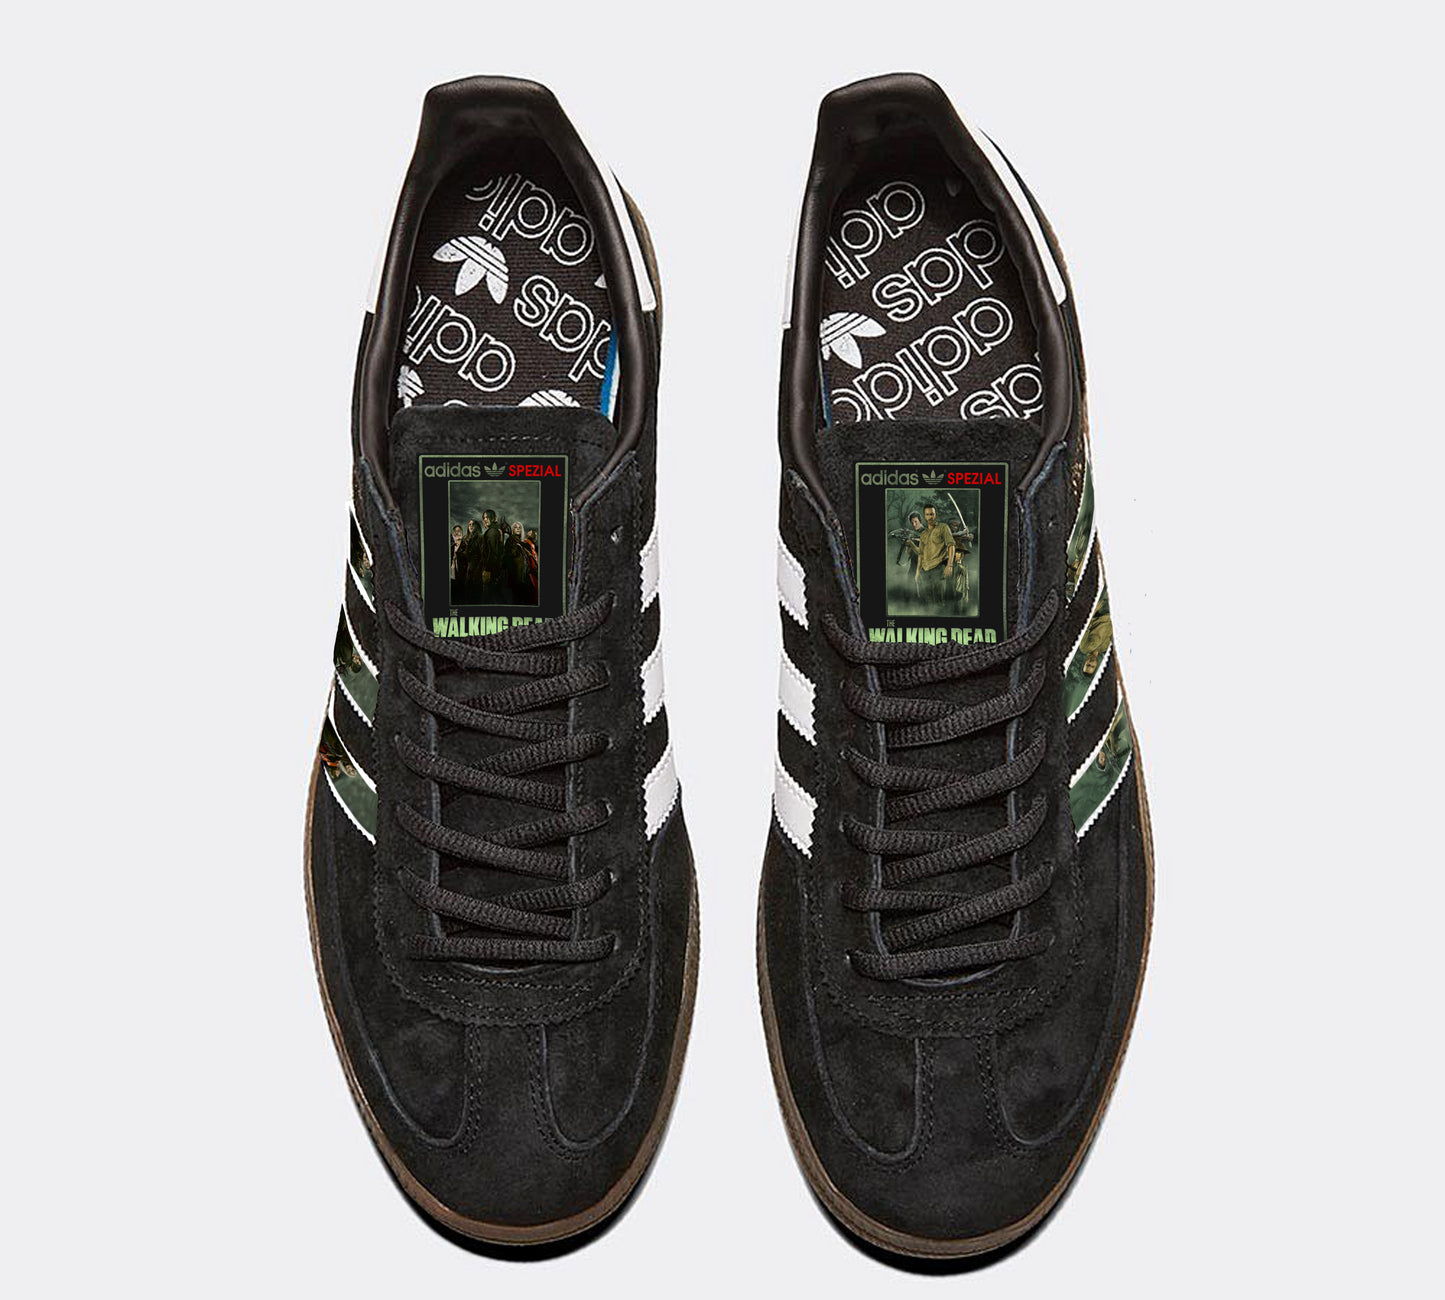 Limited edition The Walking dead inspired black / white Adidas Handball Spezial trainers / sneakers